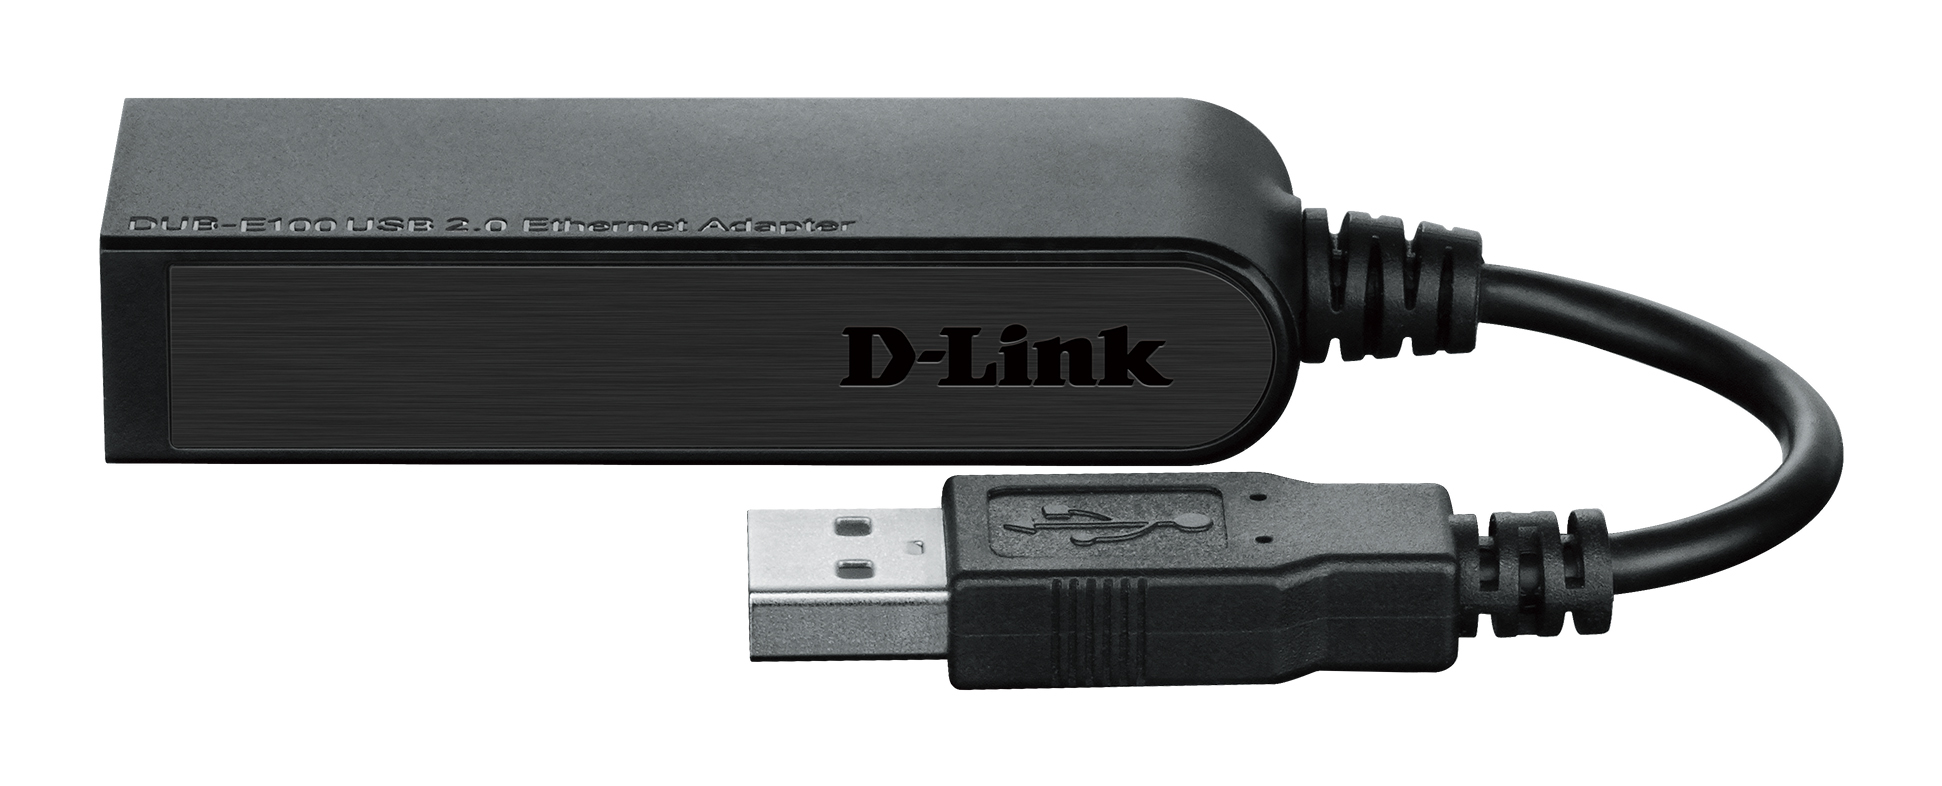 D-link Ethernet Adapter Dub 1312 New Driver For Mac